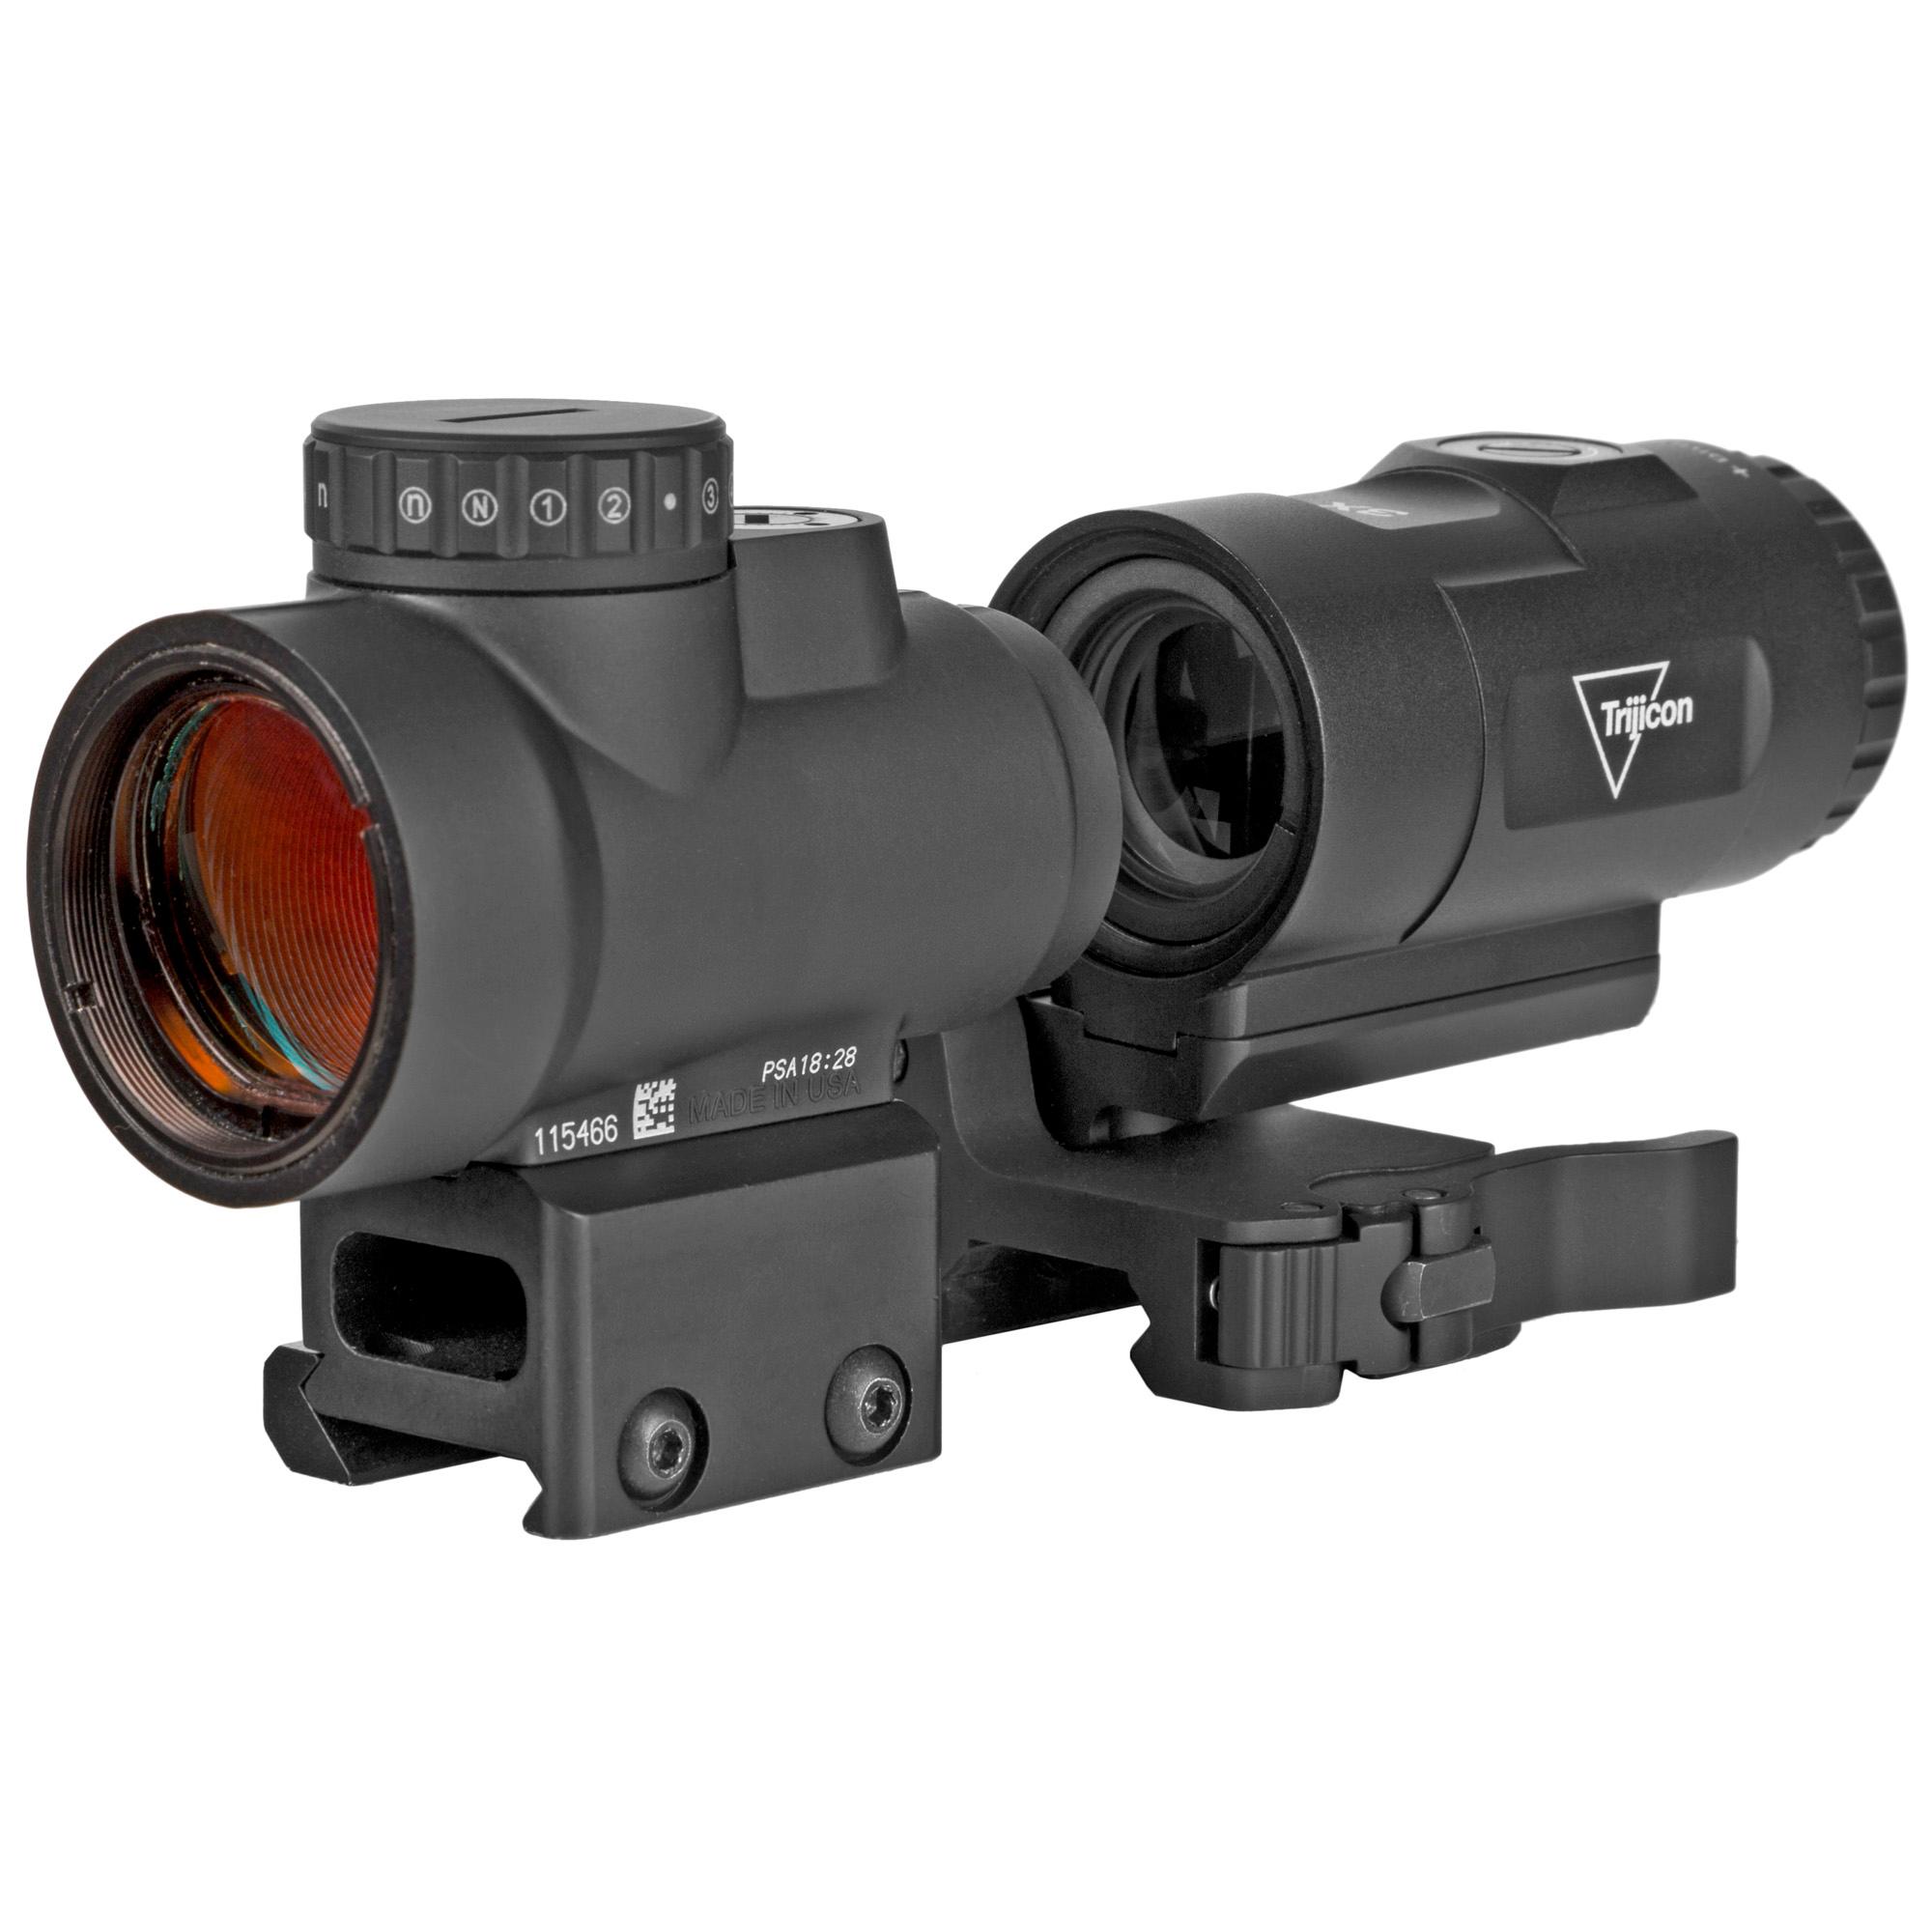 Gun Cleaning TRIJICON MRO HD RED DOT MAGNFR COMBO image 1